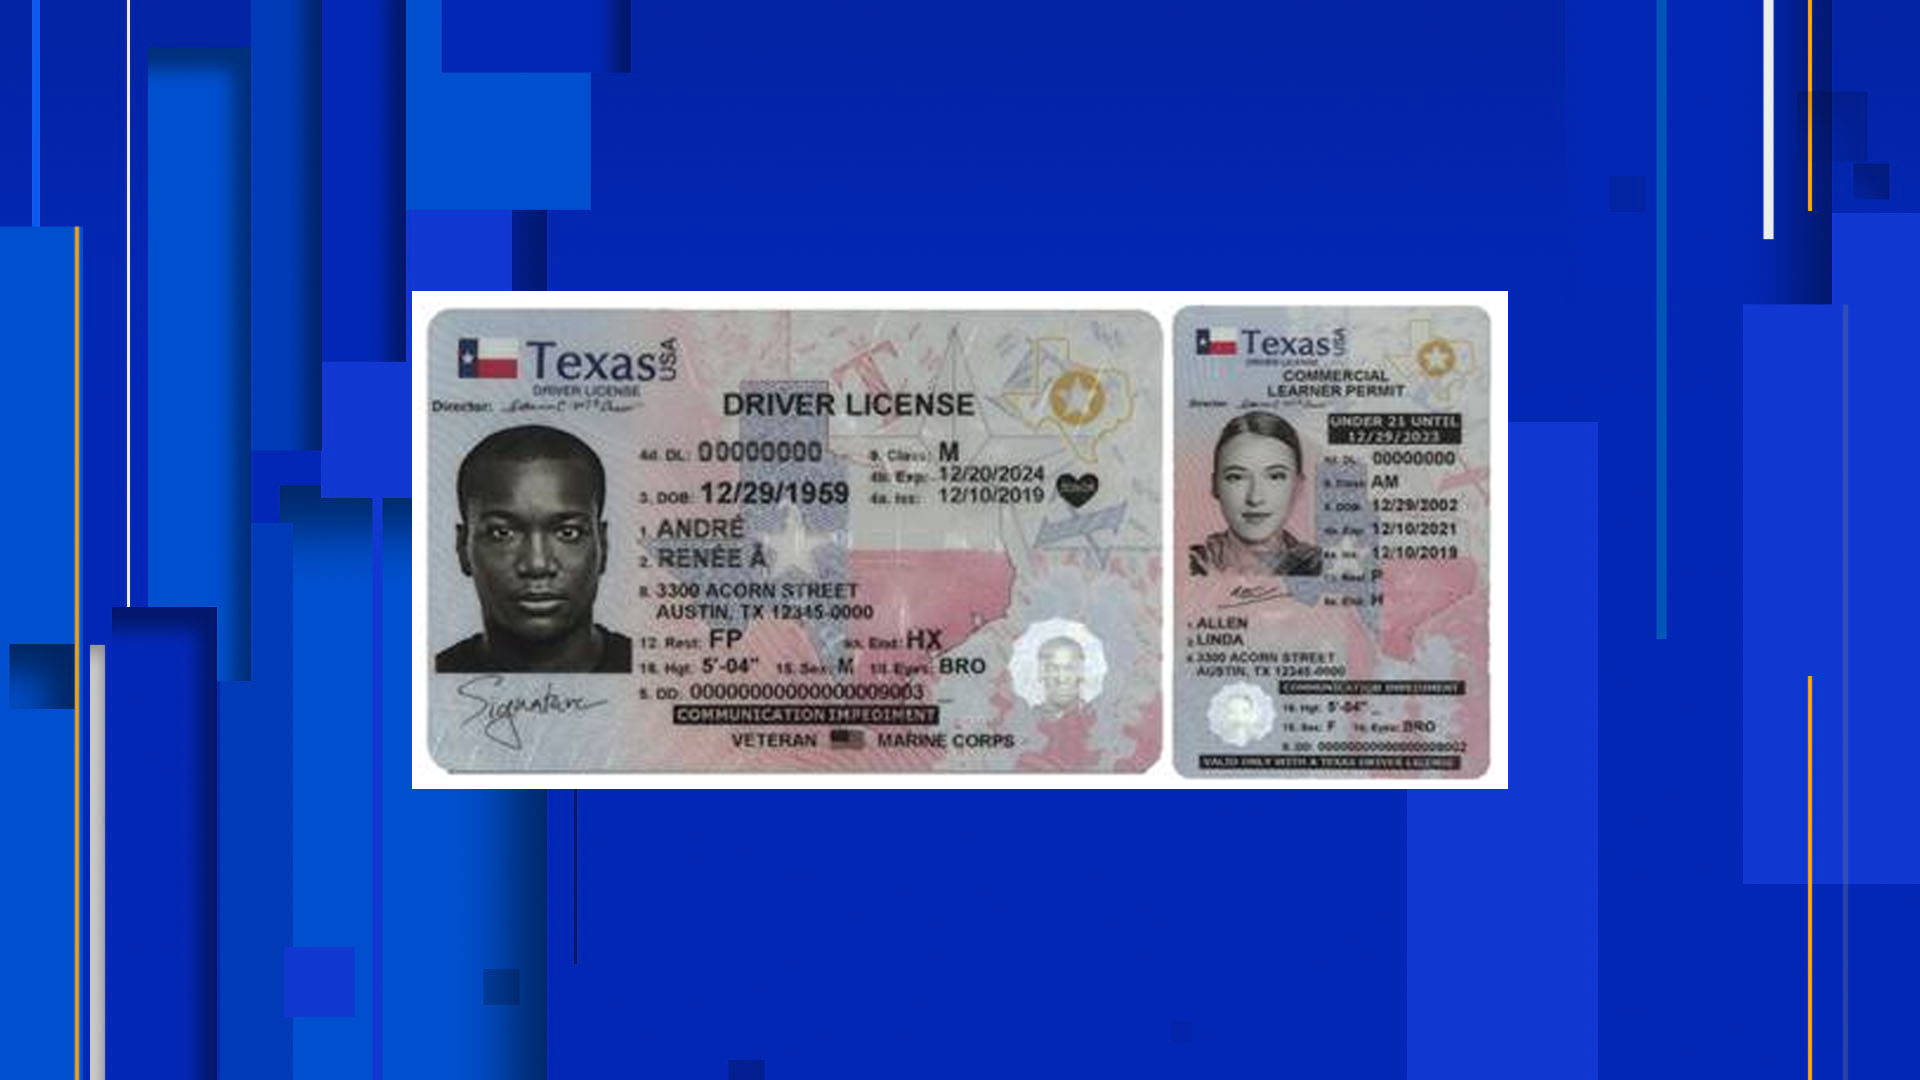 what does the star on texas driver's license mean